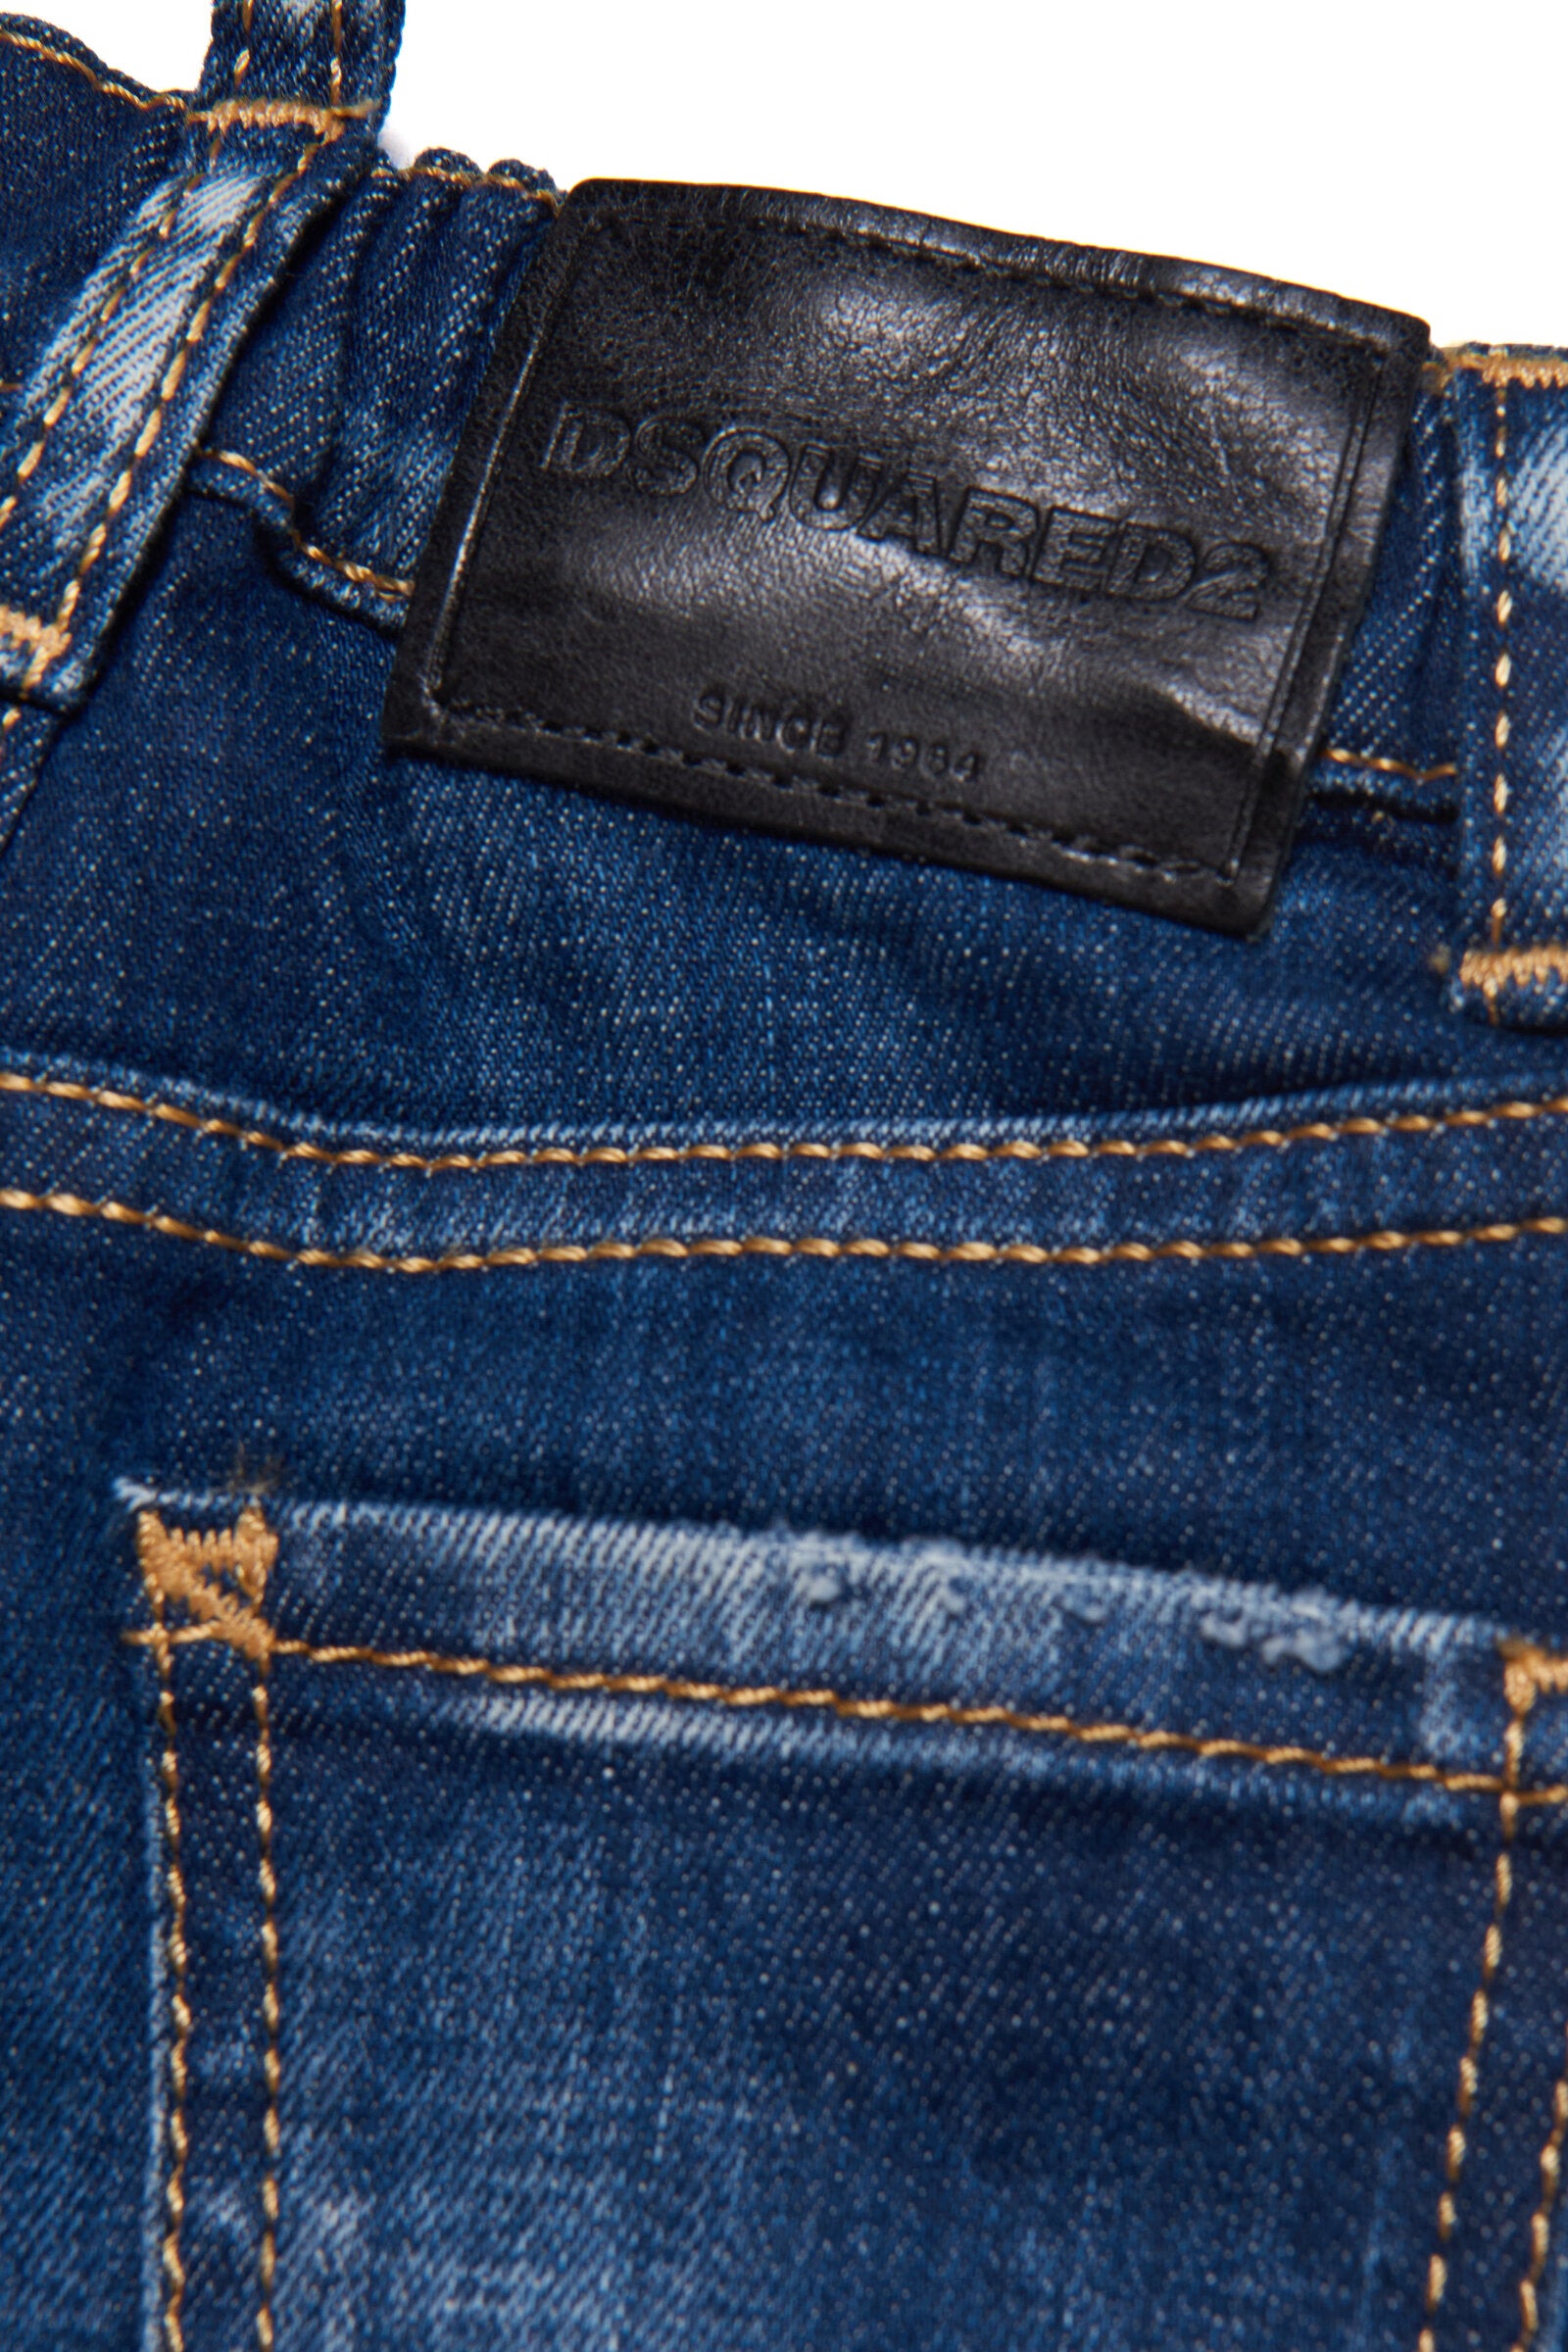 Shaded dark blue jeans with abrasions